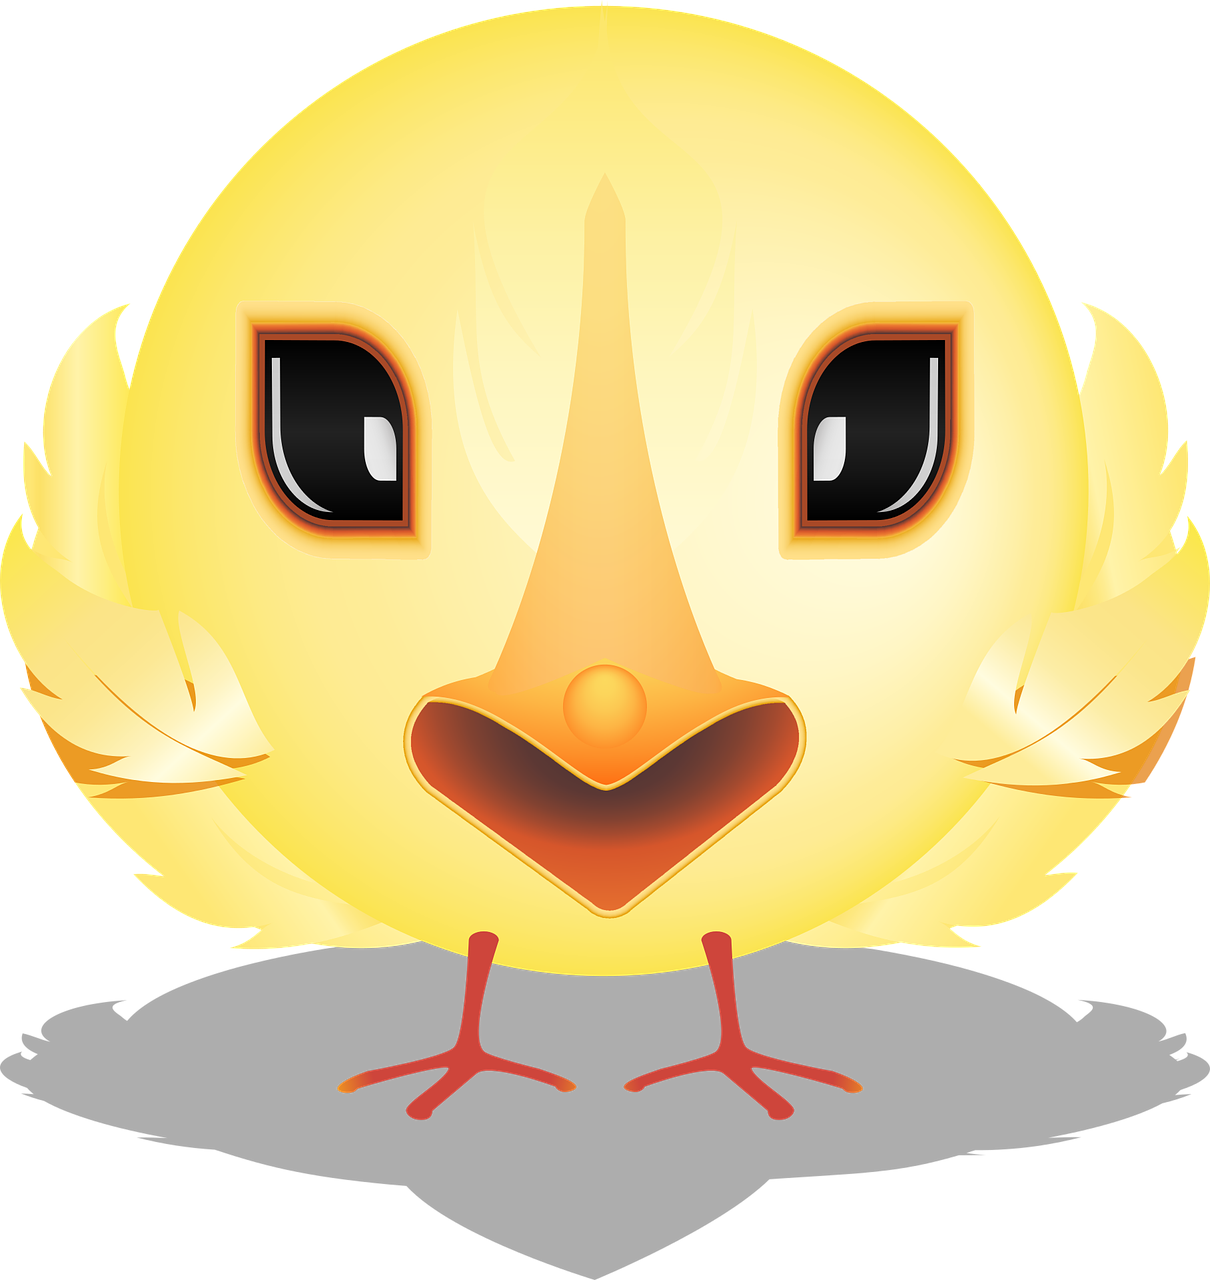 graphic  chick smiley  smiley free photo